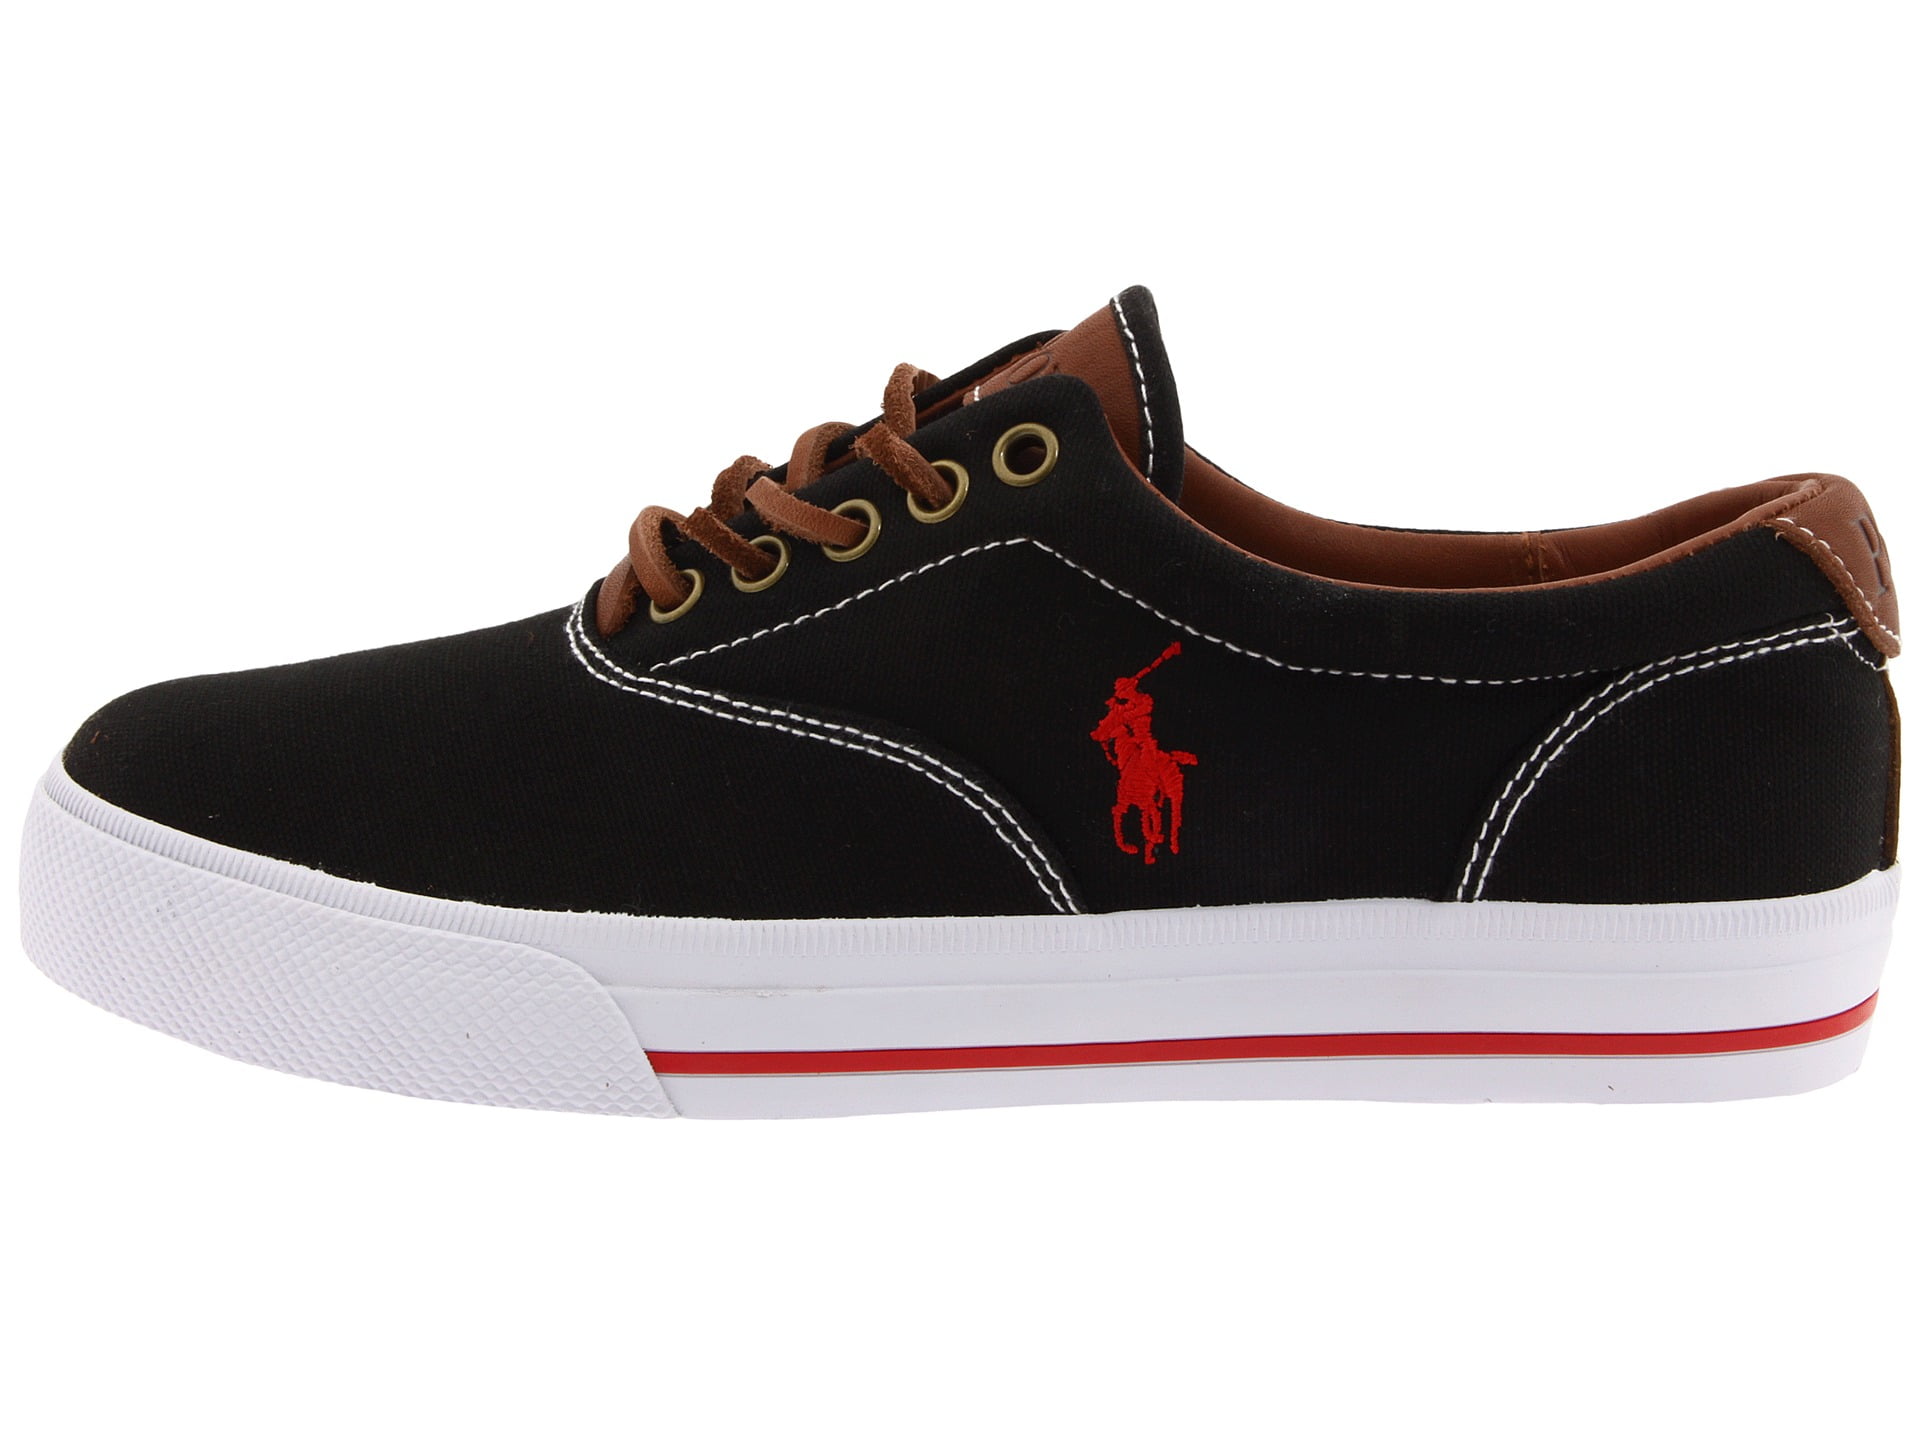 polo casual shoes mens